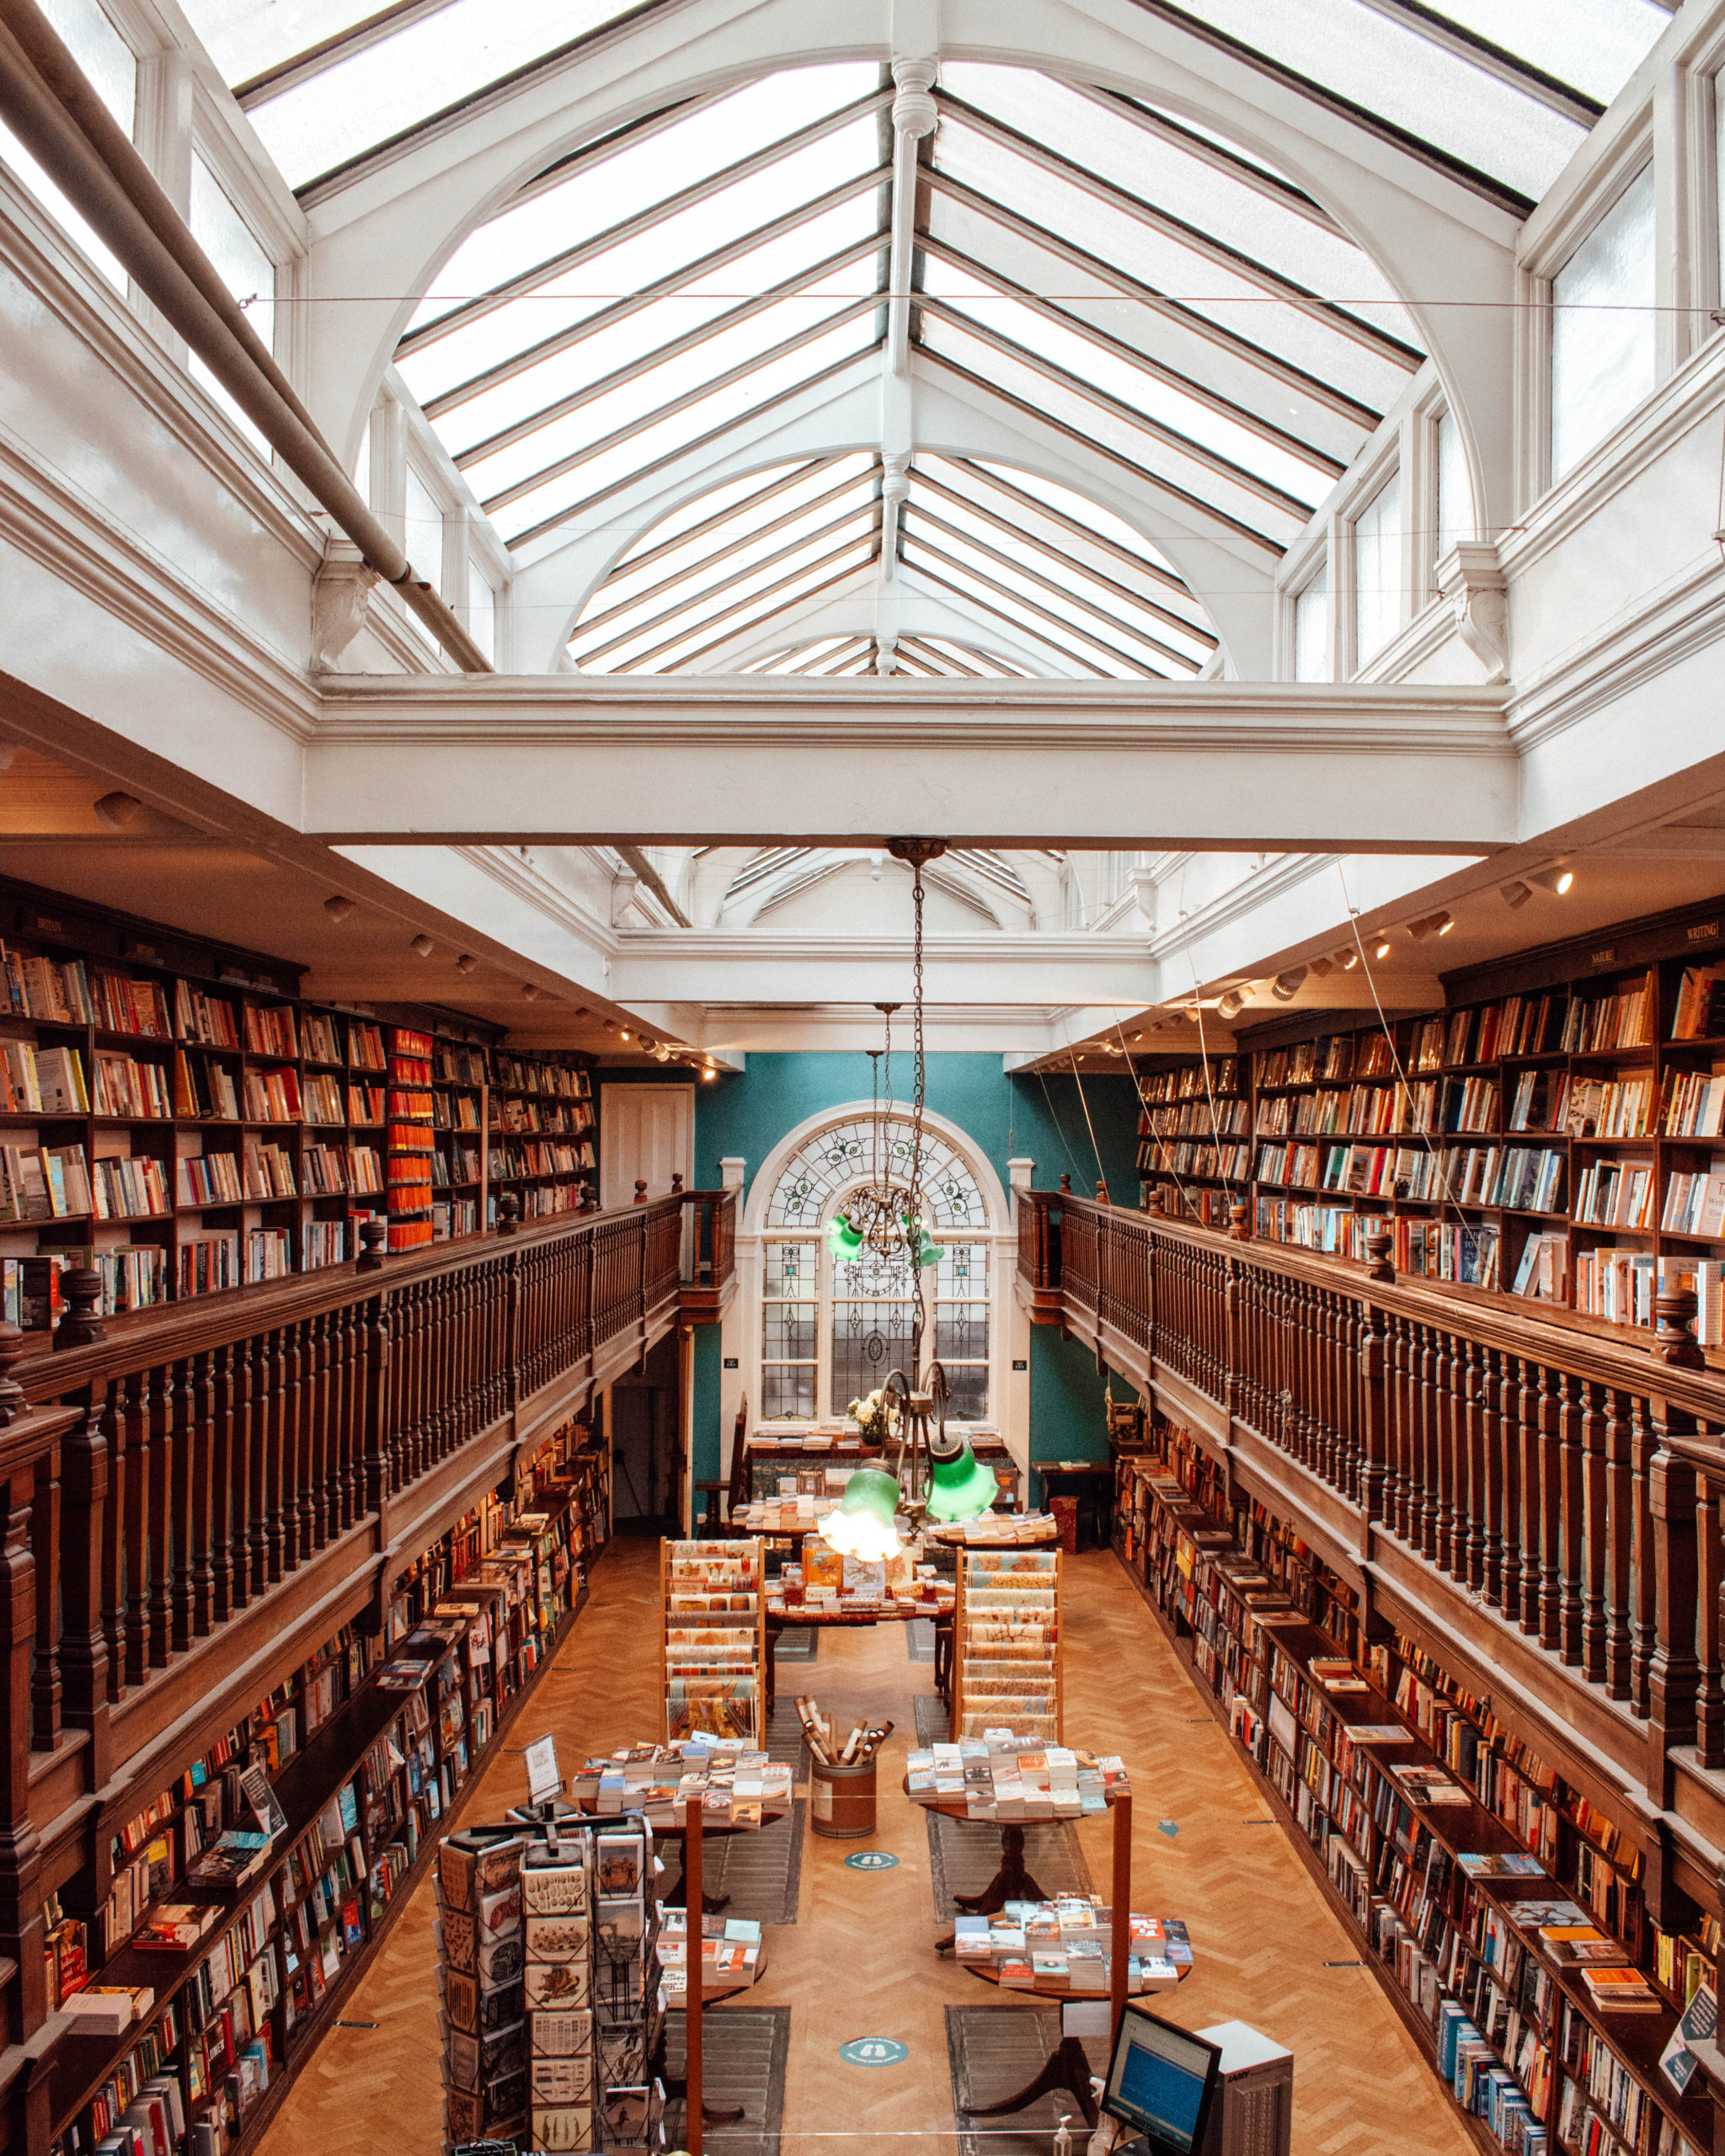 LITERARY LONDON – A LOCAL’S GUIDE